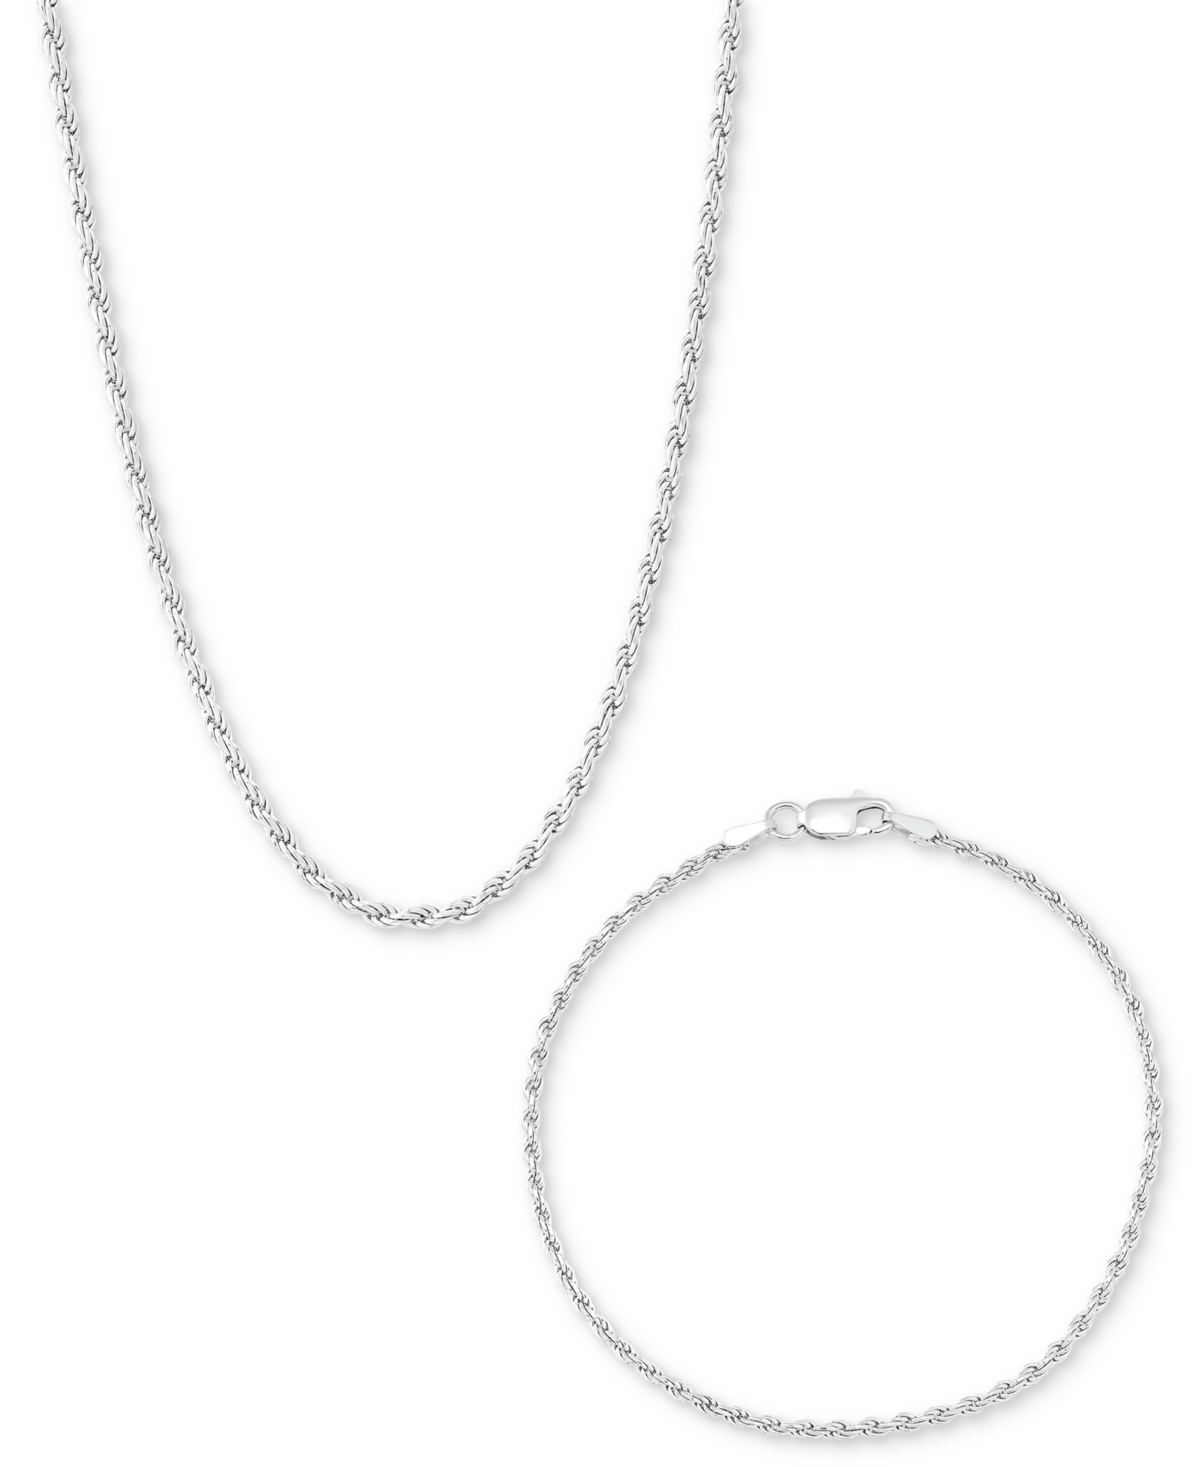 Italian Silver 2-pc. Set Polished Rope Link Collar Necklace & Matching Bracelet In Silver